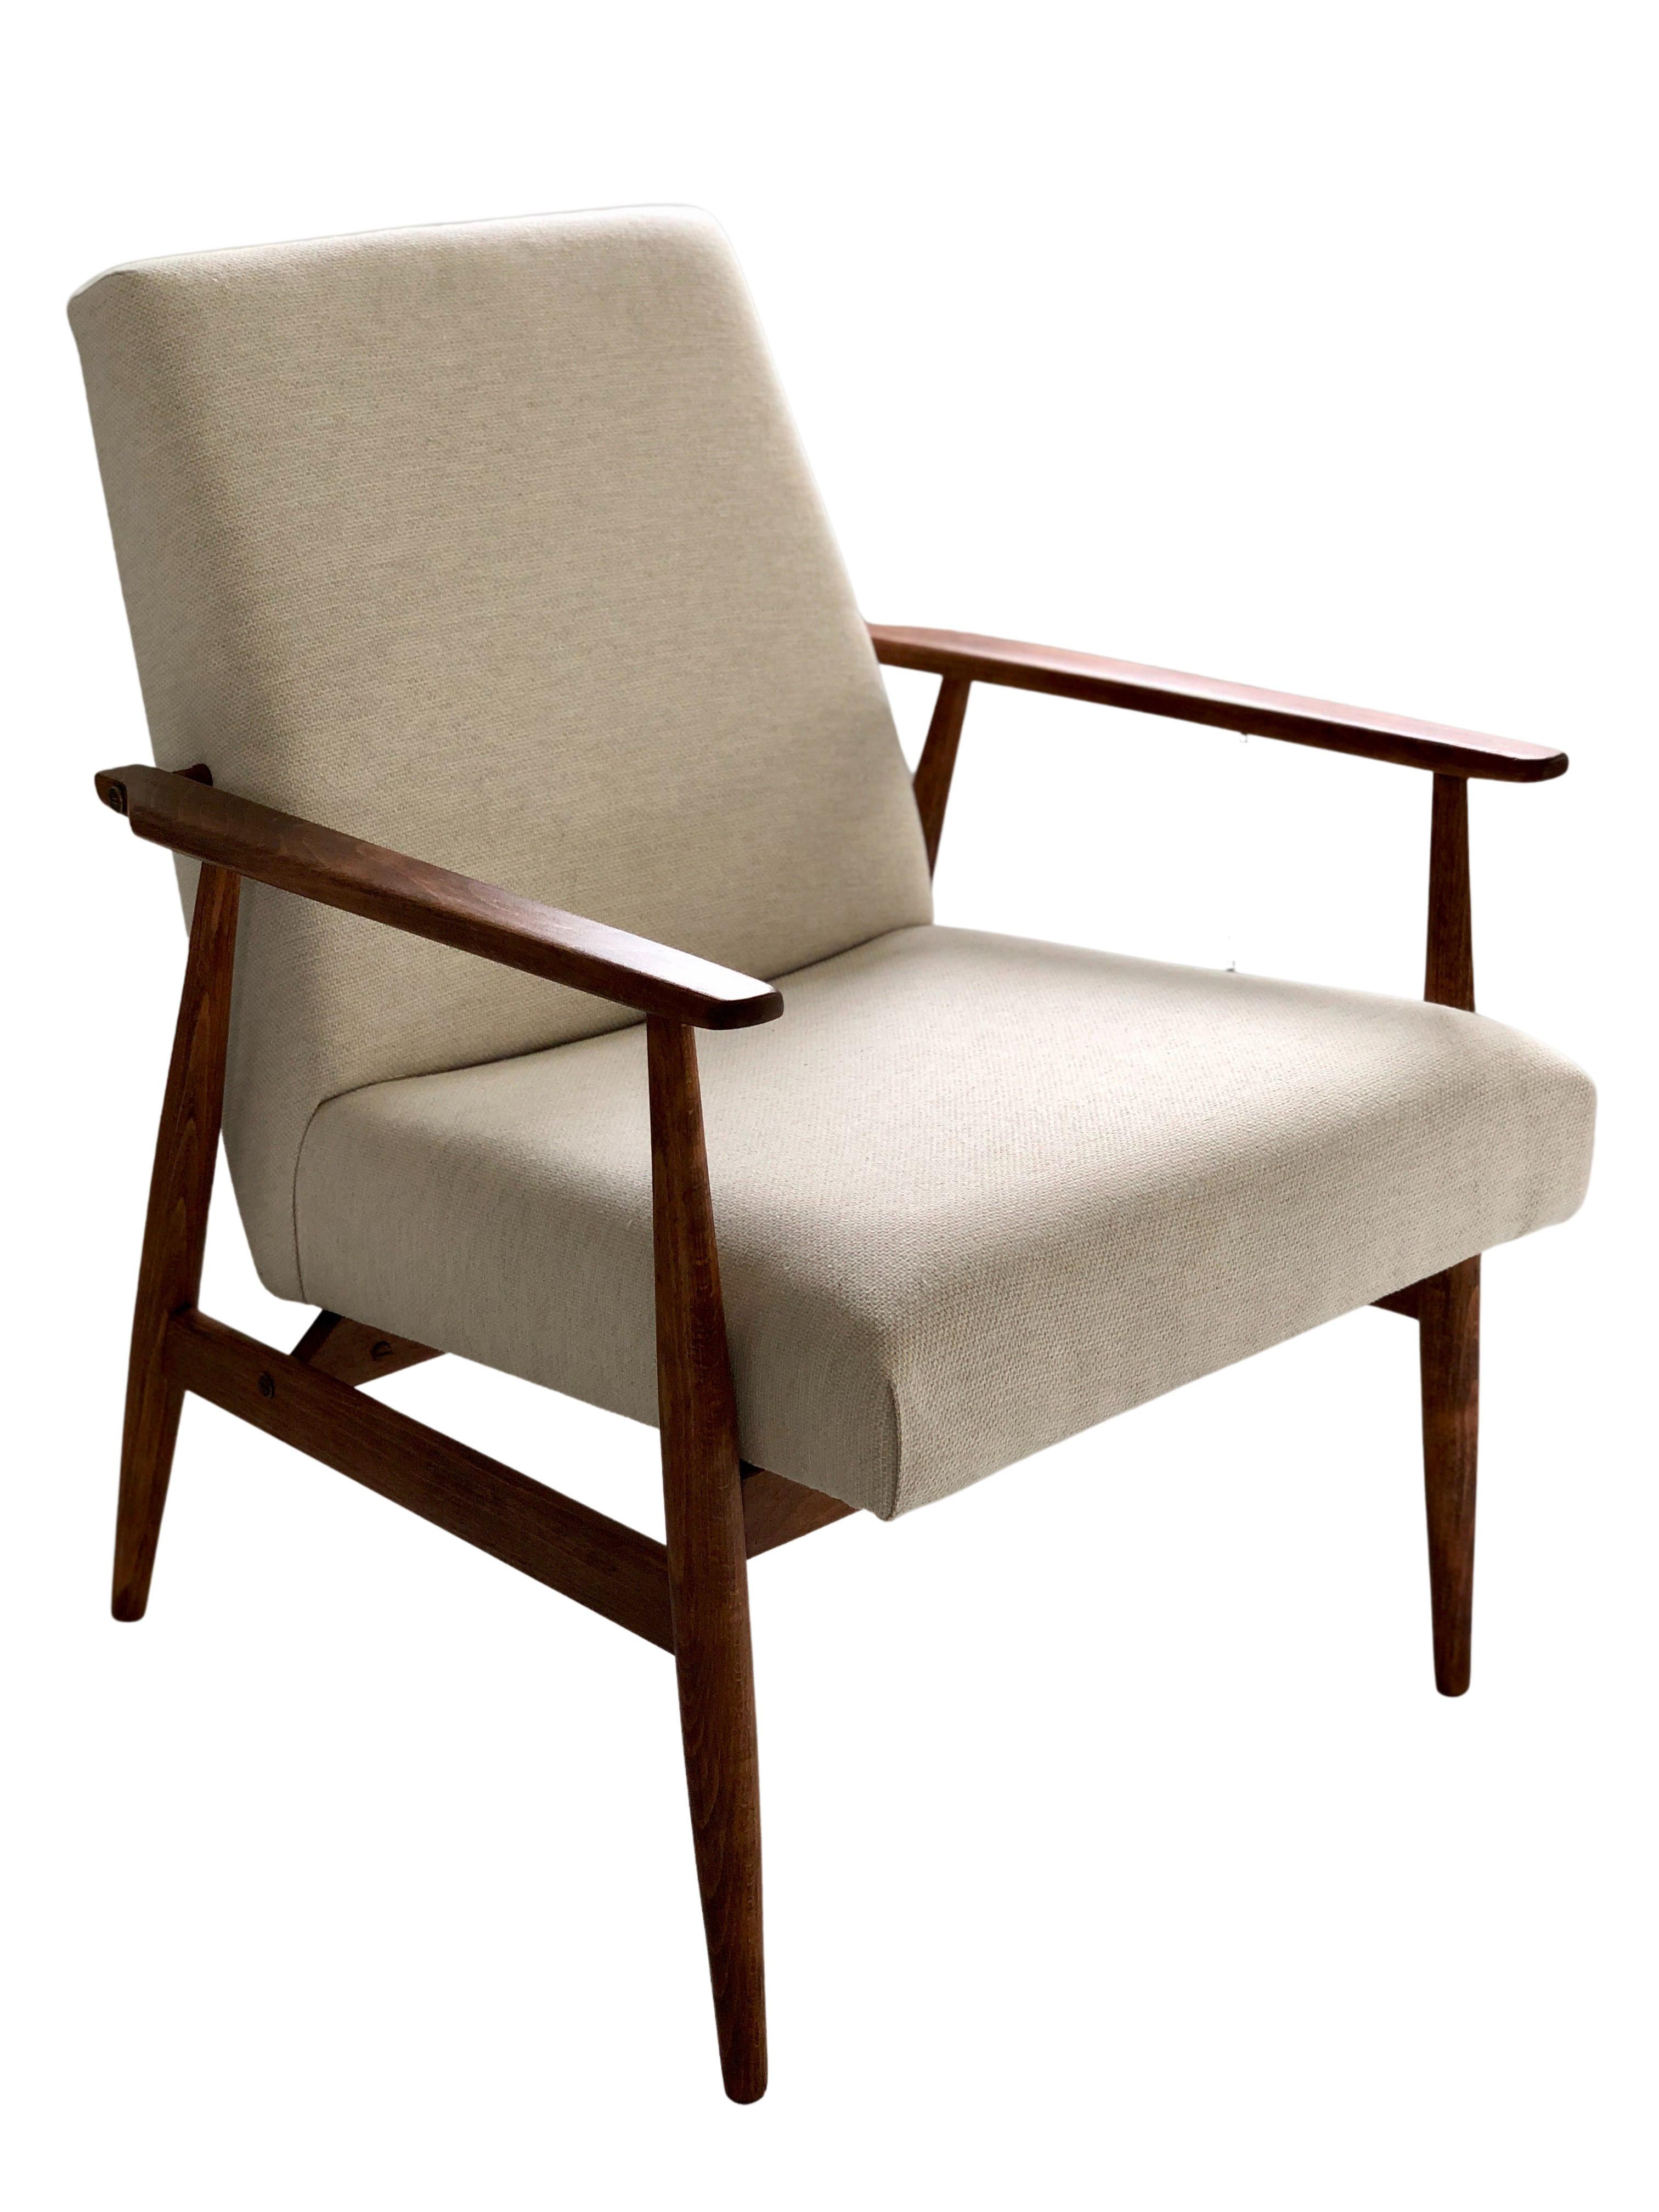 Cotton Mid Century Armchair by Henryk Lis in Beige, Europe, 1960s, For Sale